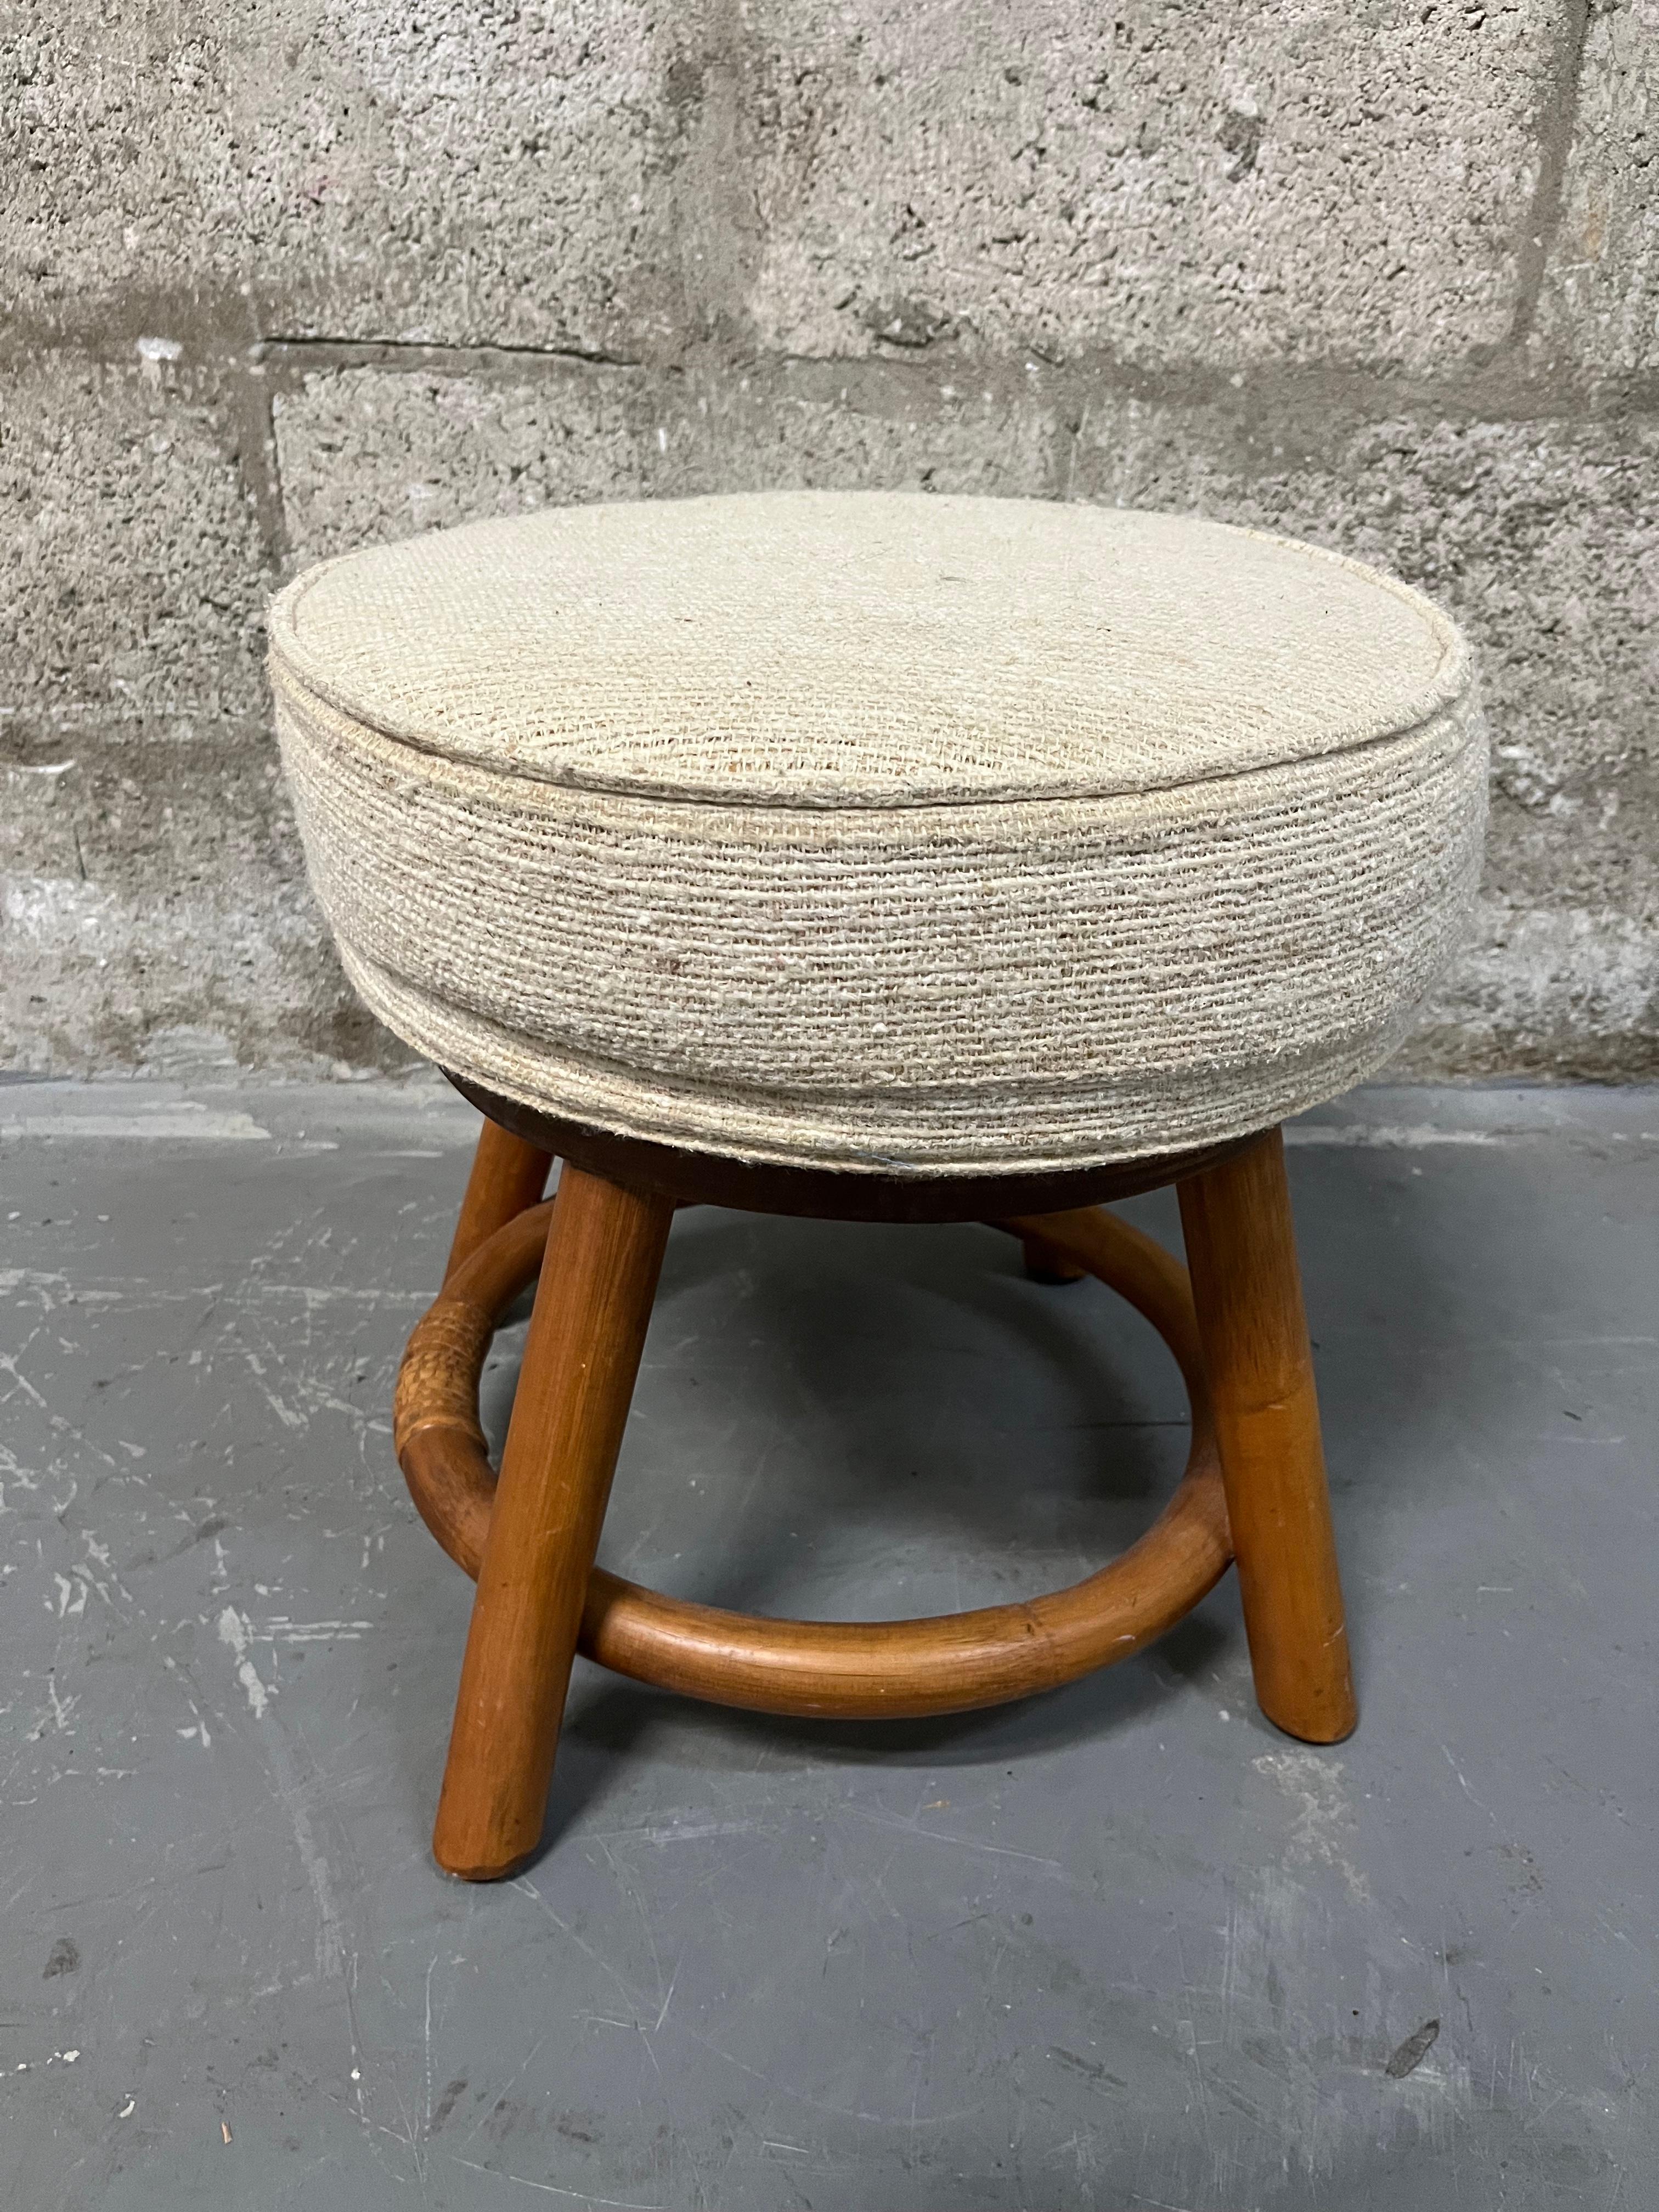 Bamboo Rattan Wicker Swivel Footstool in the Paul Frankl's Style. Circa 1970s  For Sale 3